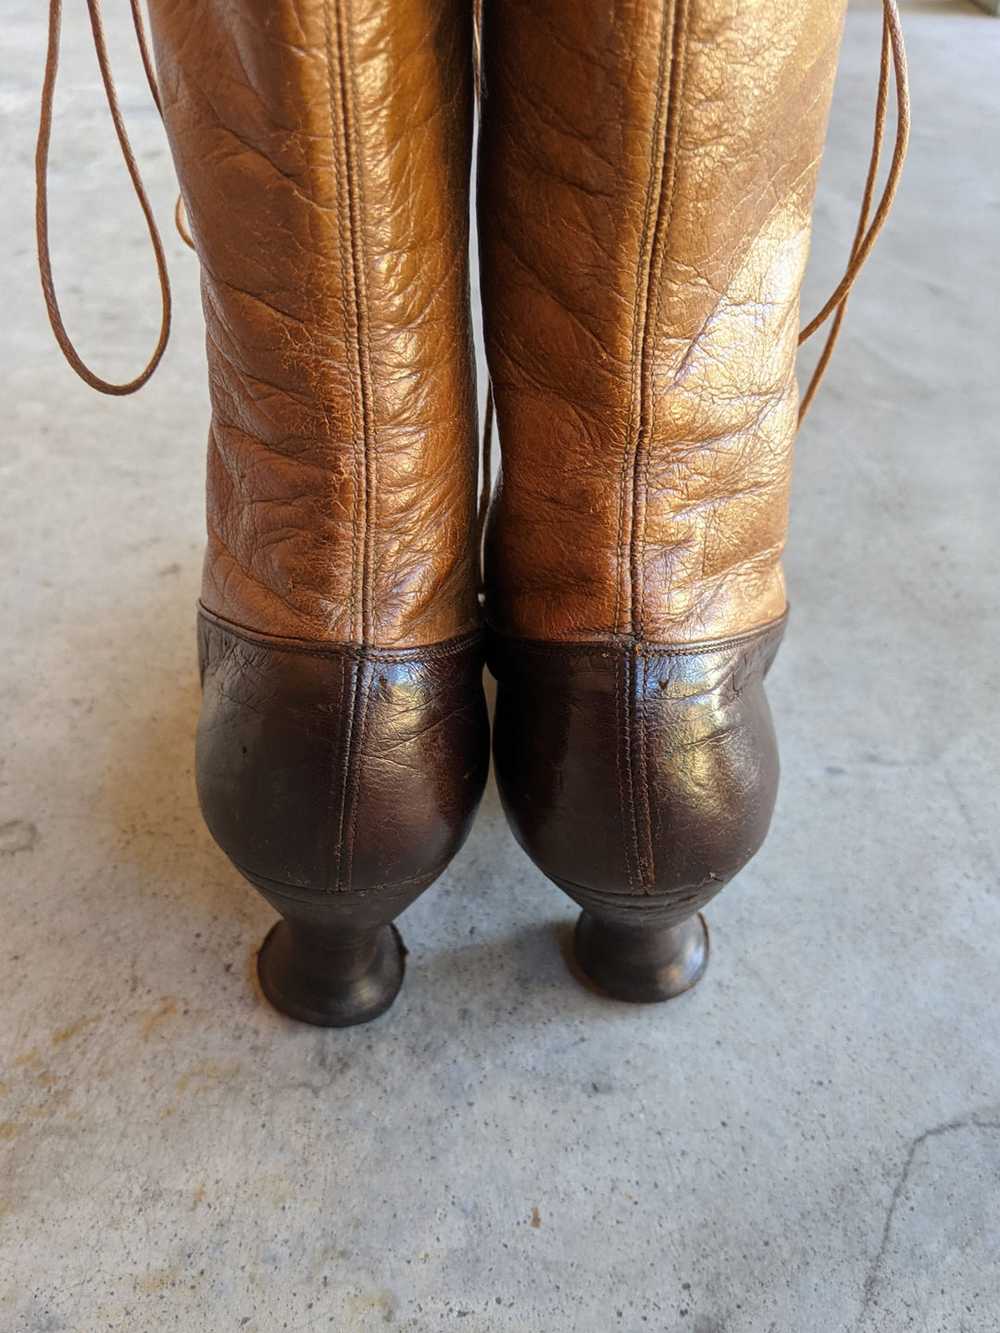 c. 1910s-1920s Two-Tone Brown Boots | Approx Sz 6 - image 8